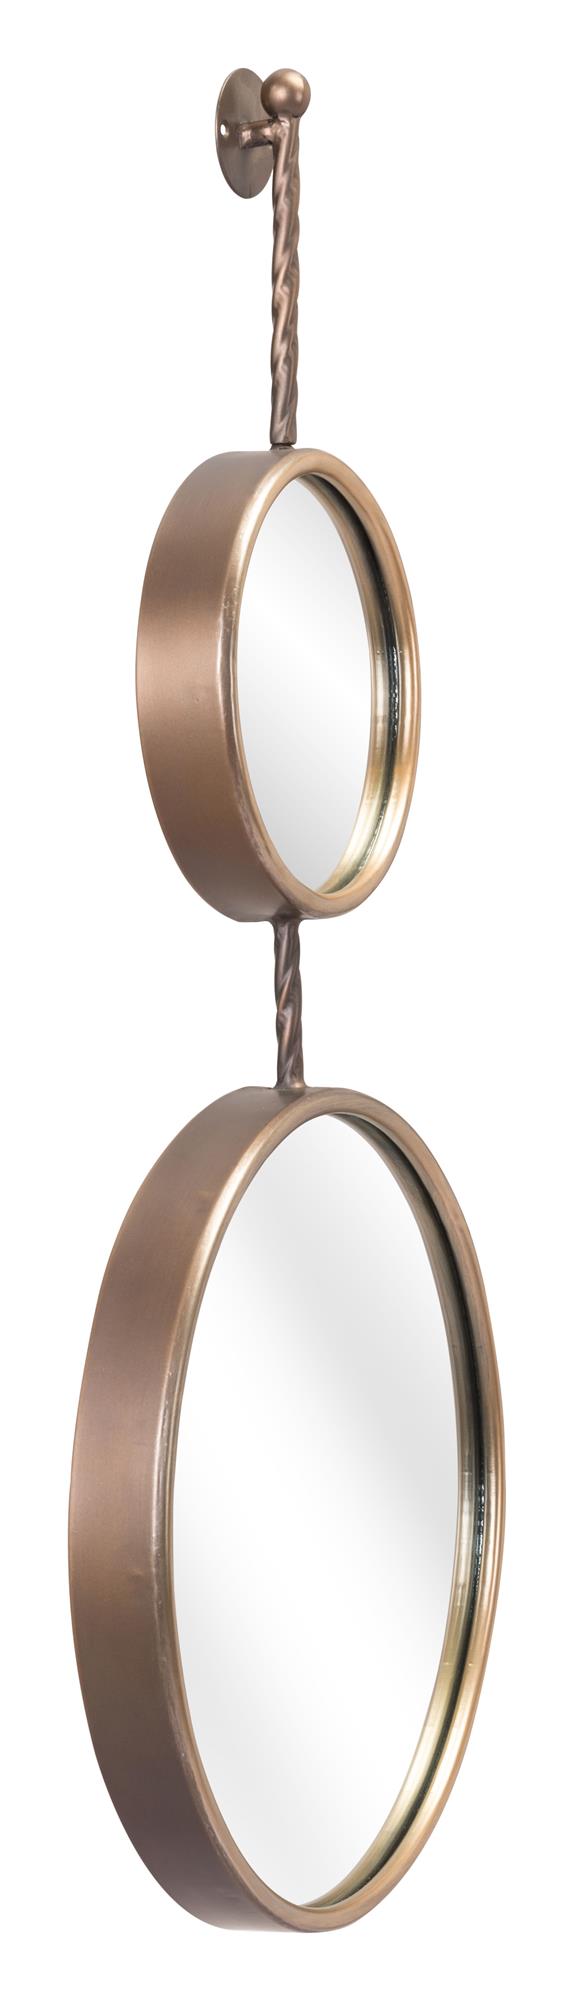 Modern vertical mirror with bronze frame by Ophelia -  N/A